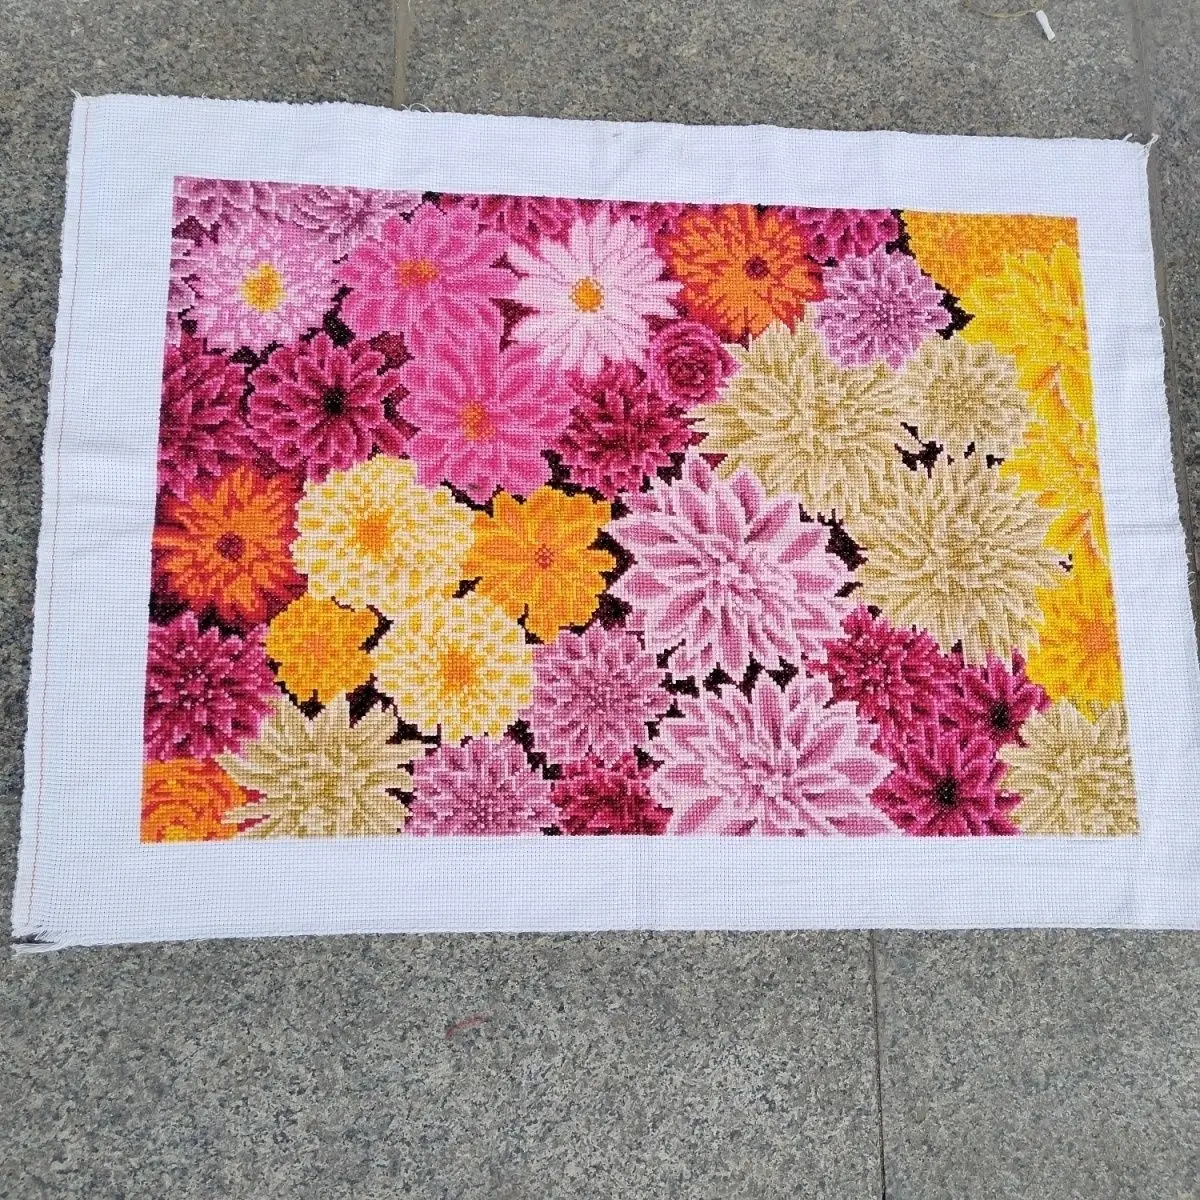 

Hand embroidered cross stitch finished product, with flowers blooming in abundance and wealth, peonies blooming in the living